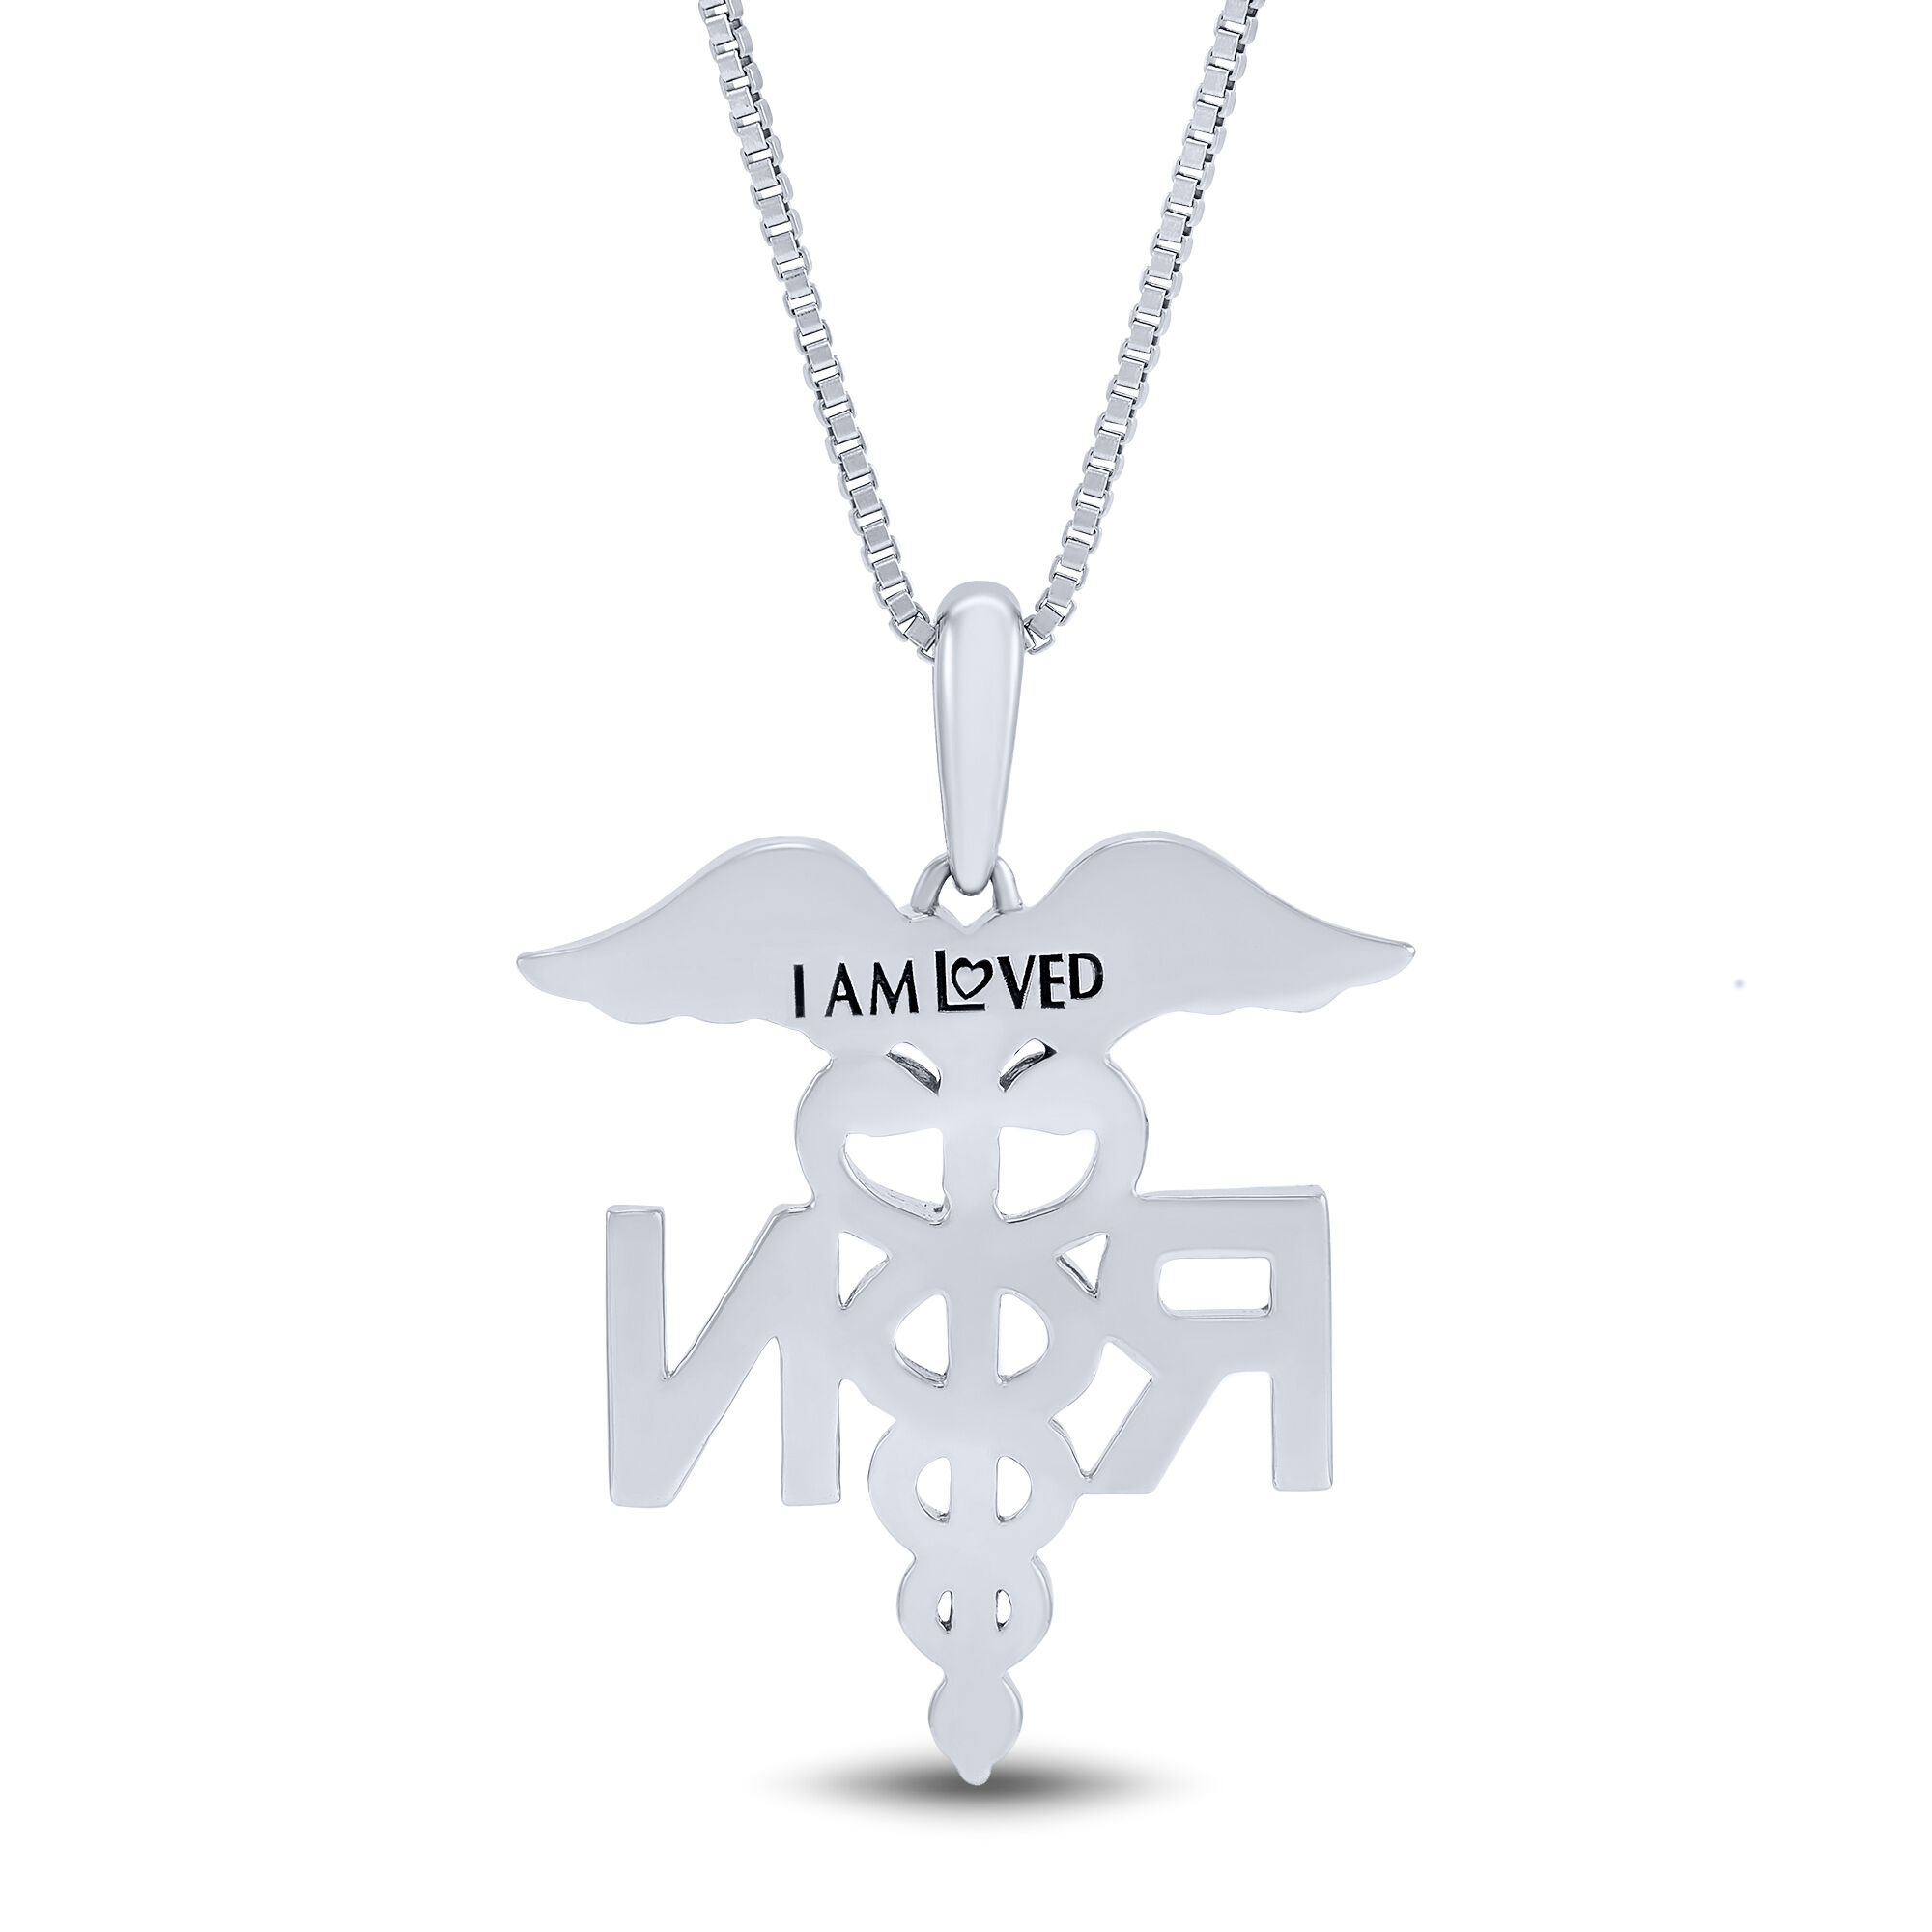 Buy Caduceus Symbol of Medicine Charm Pendant Necklace for Doctors Nurses  14K Gold Plated 925 Sterling Silver Snake Entwined Care Life Hermes Online  in India - Etsy